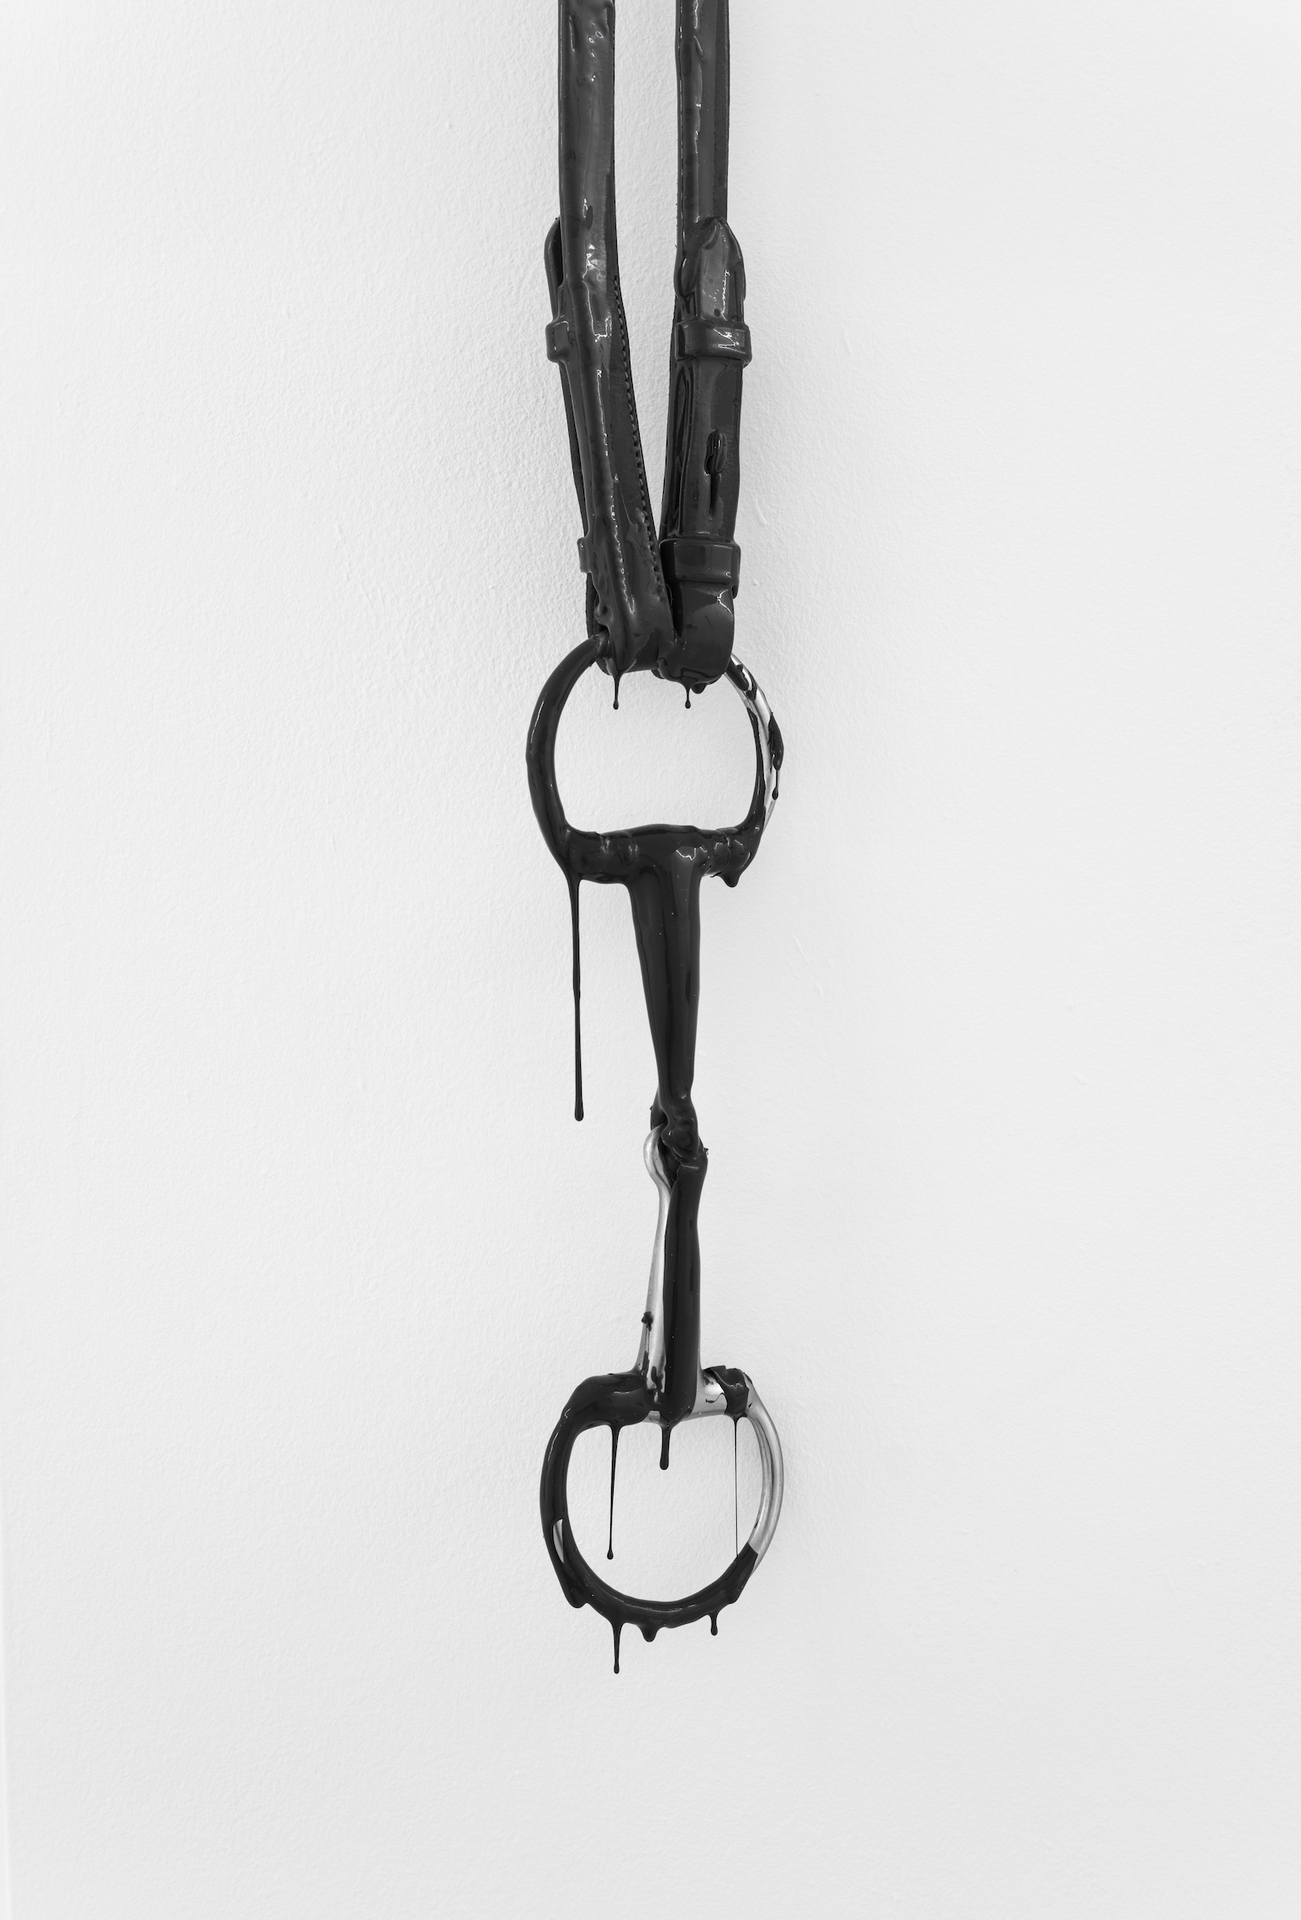 Eliza Ballesteros, Horse Bite I, stainless steel snaffle, leather bridles, latex, eye plate, 8 x 180 cm, 2021